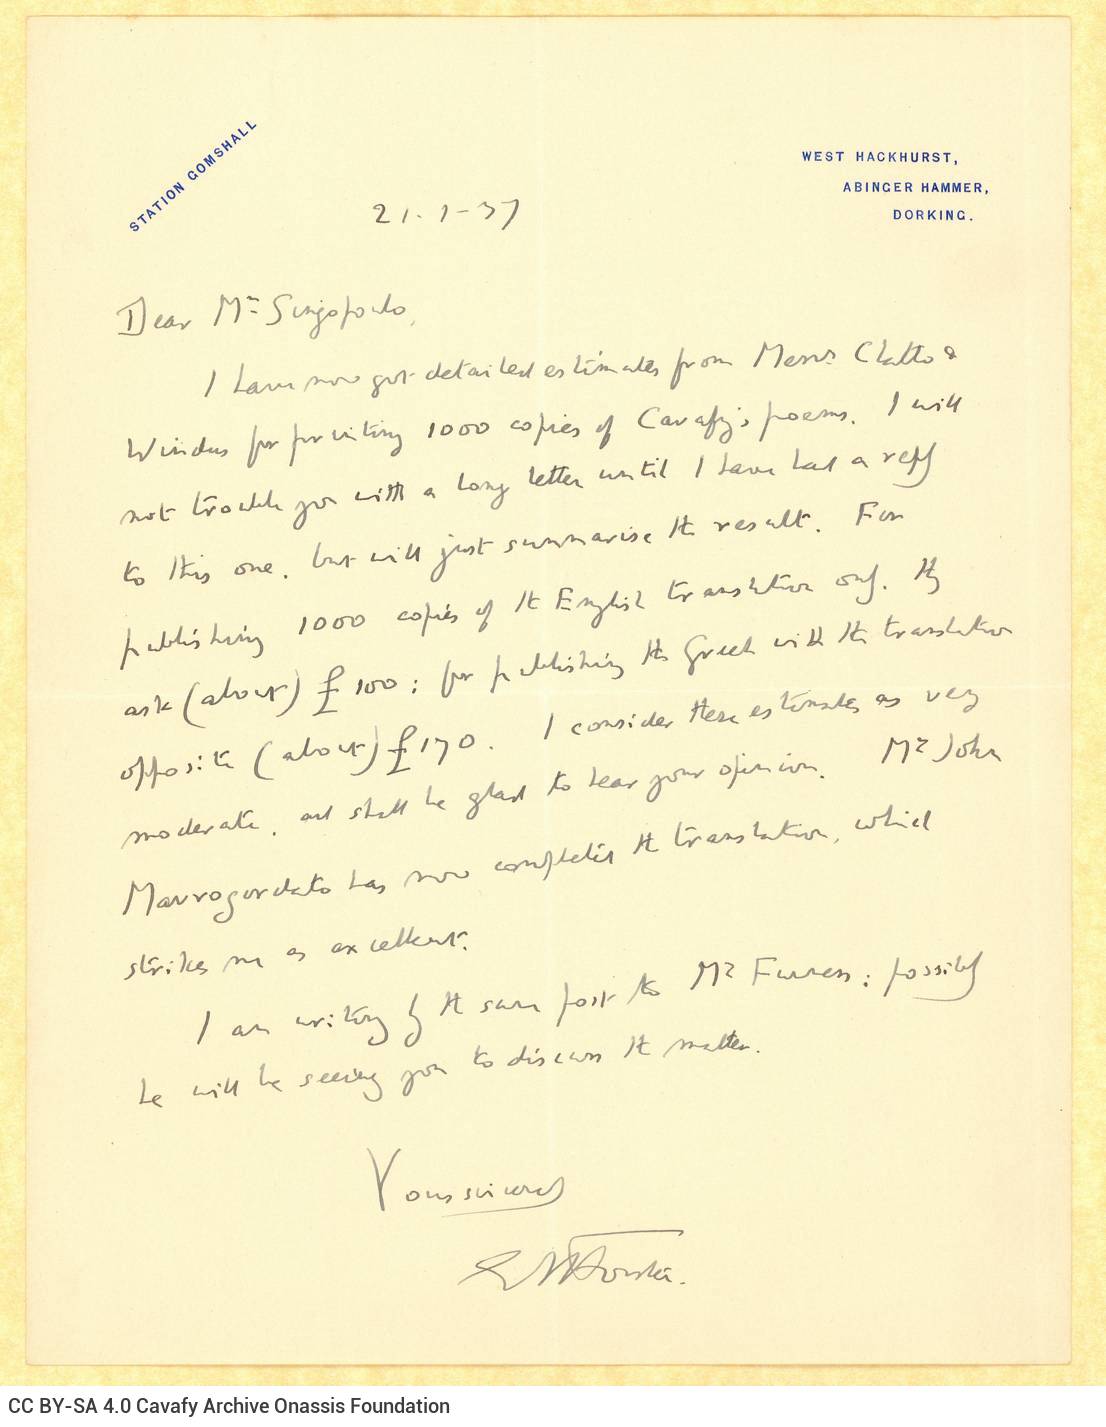 Handwritten letter by E. M. Forster to Alekos Singopoulo on one side of a letterhead with his address in Dorking, England, in